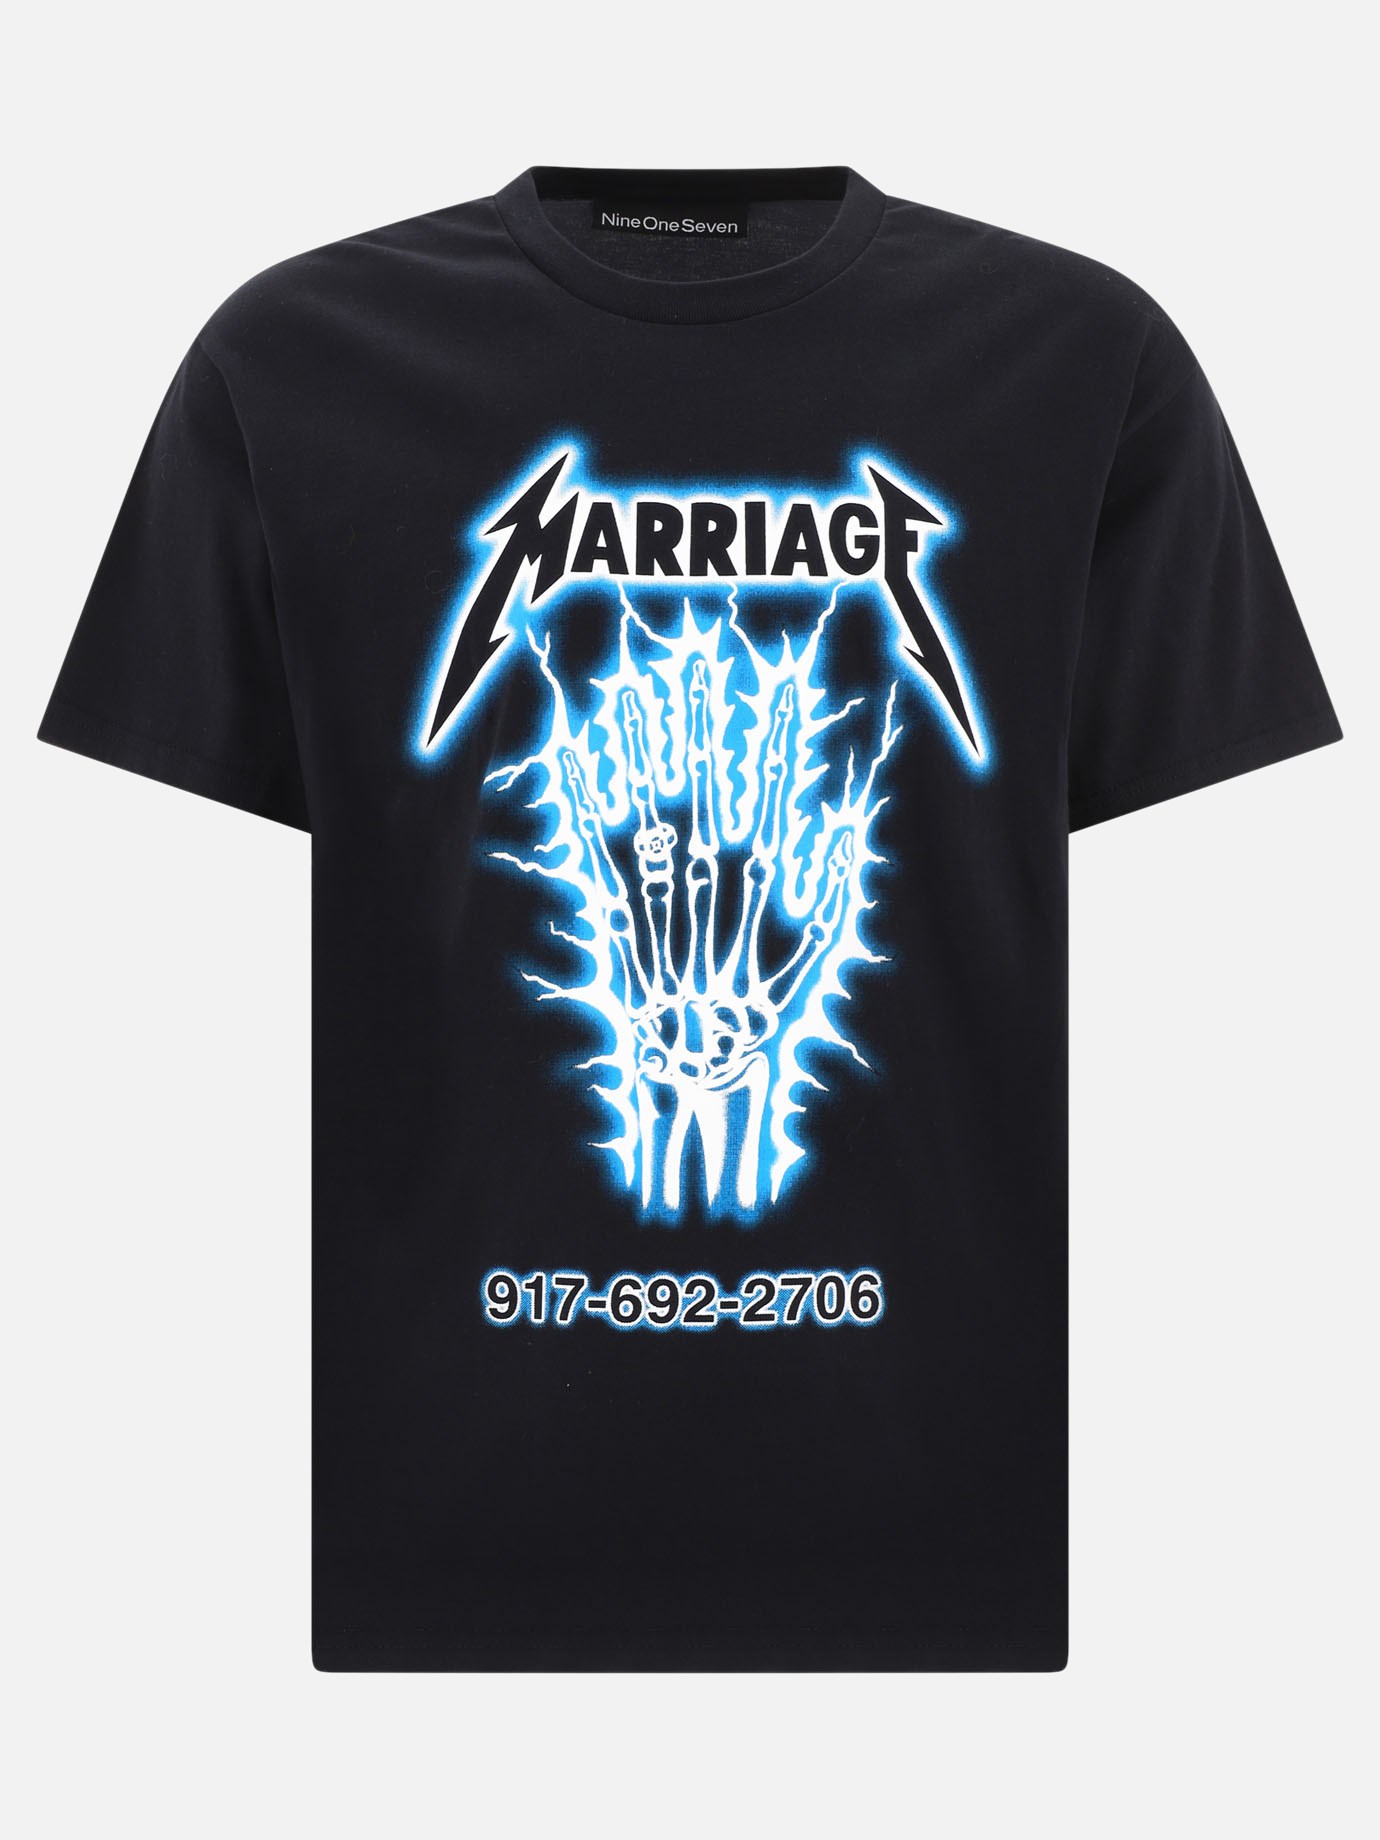  Marriage  t-shirtby Call Me 917 - 5